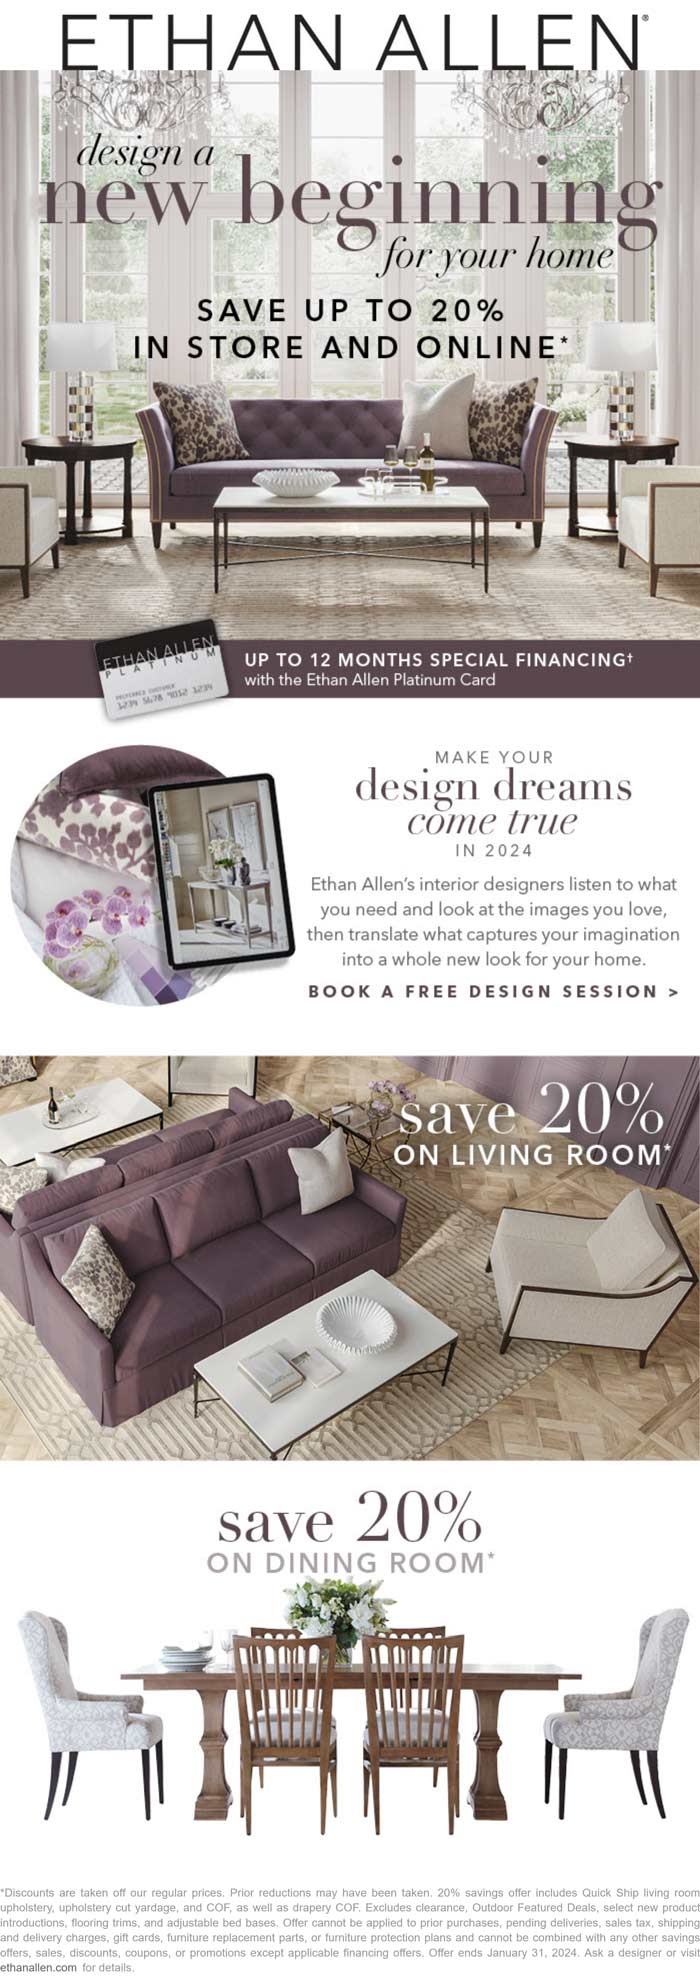 20% off furniture and upholstery at Ethan Allen #ethanallen